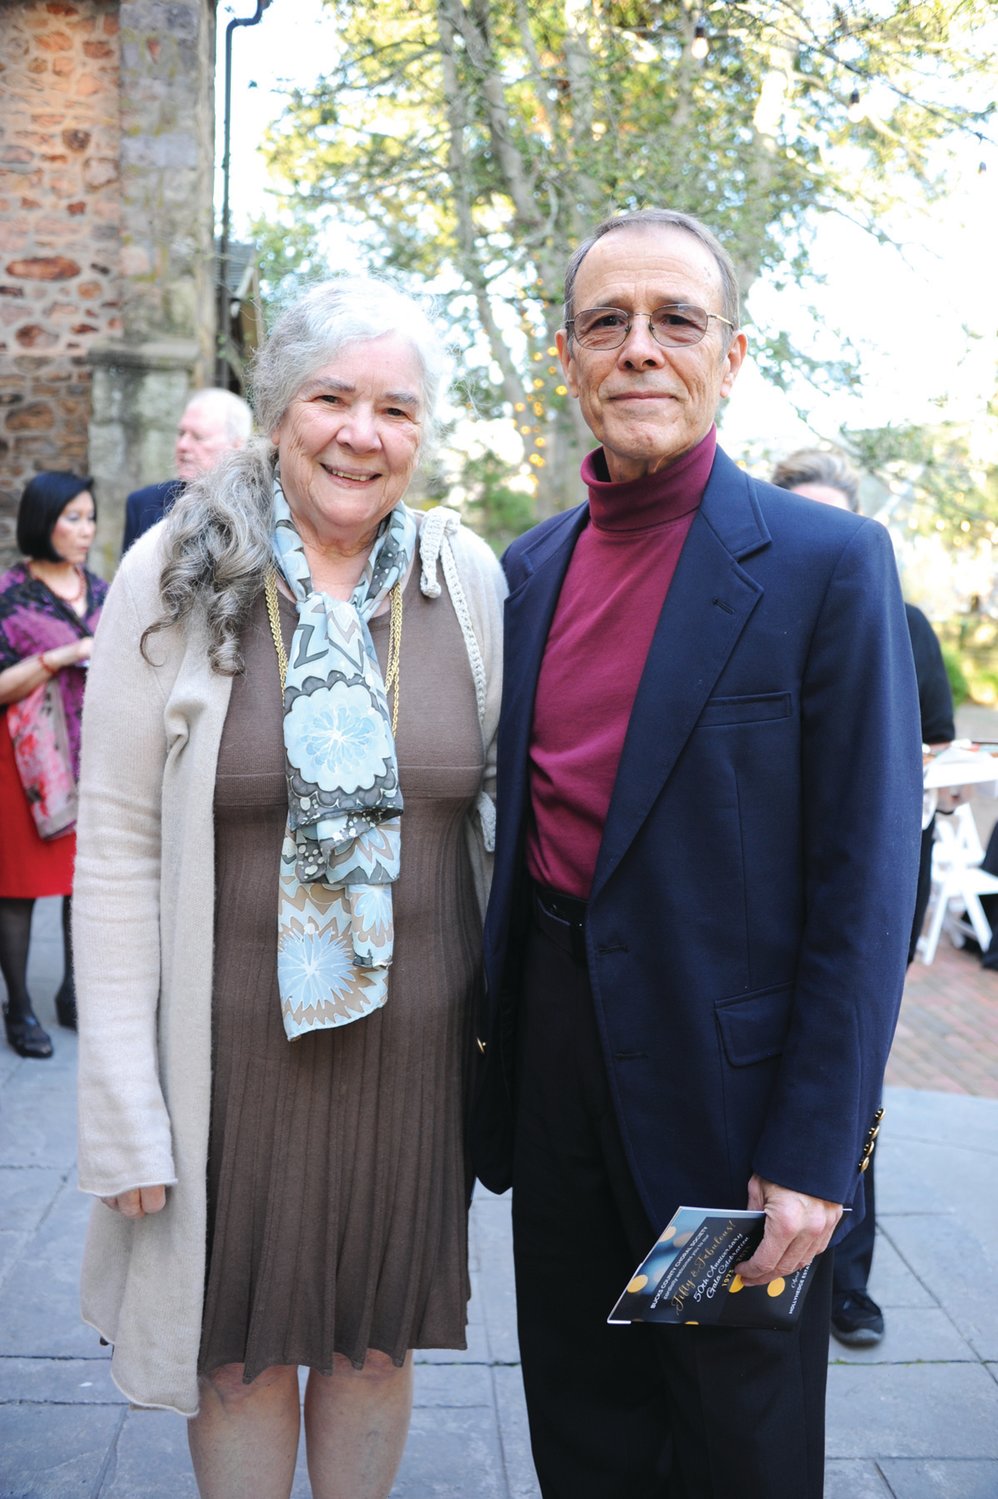 Patricia Reilly and Chaunce Monta take part in the Bucks County Choral Society’s 50th anniversary gala Sunday. Monta is secretary of the organization’s board of directors and its choir council.